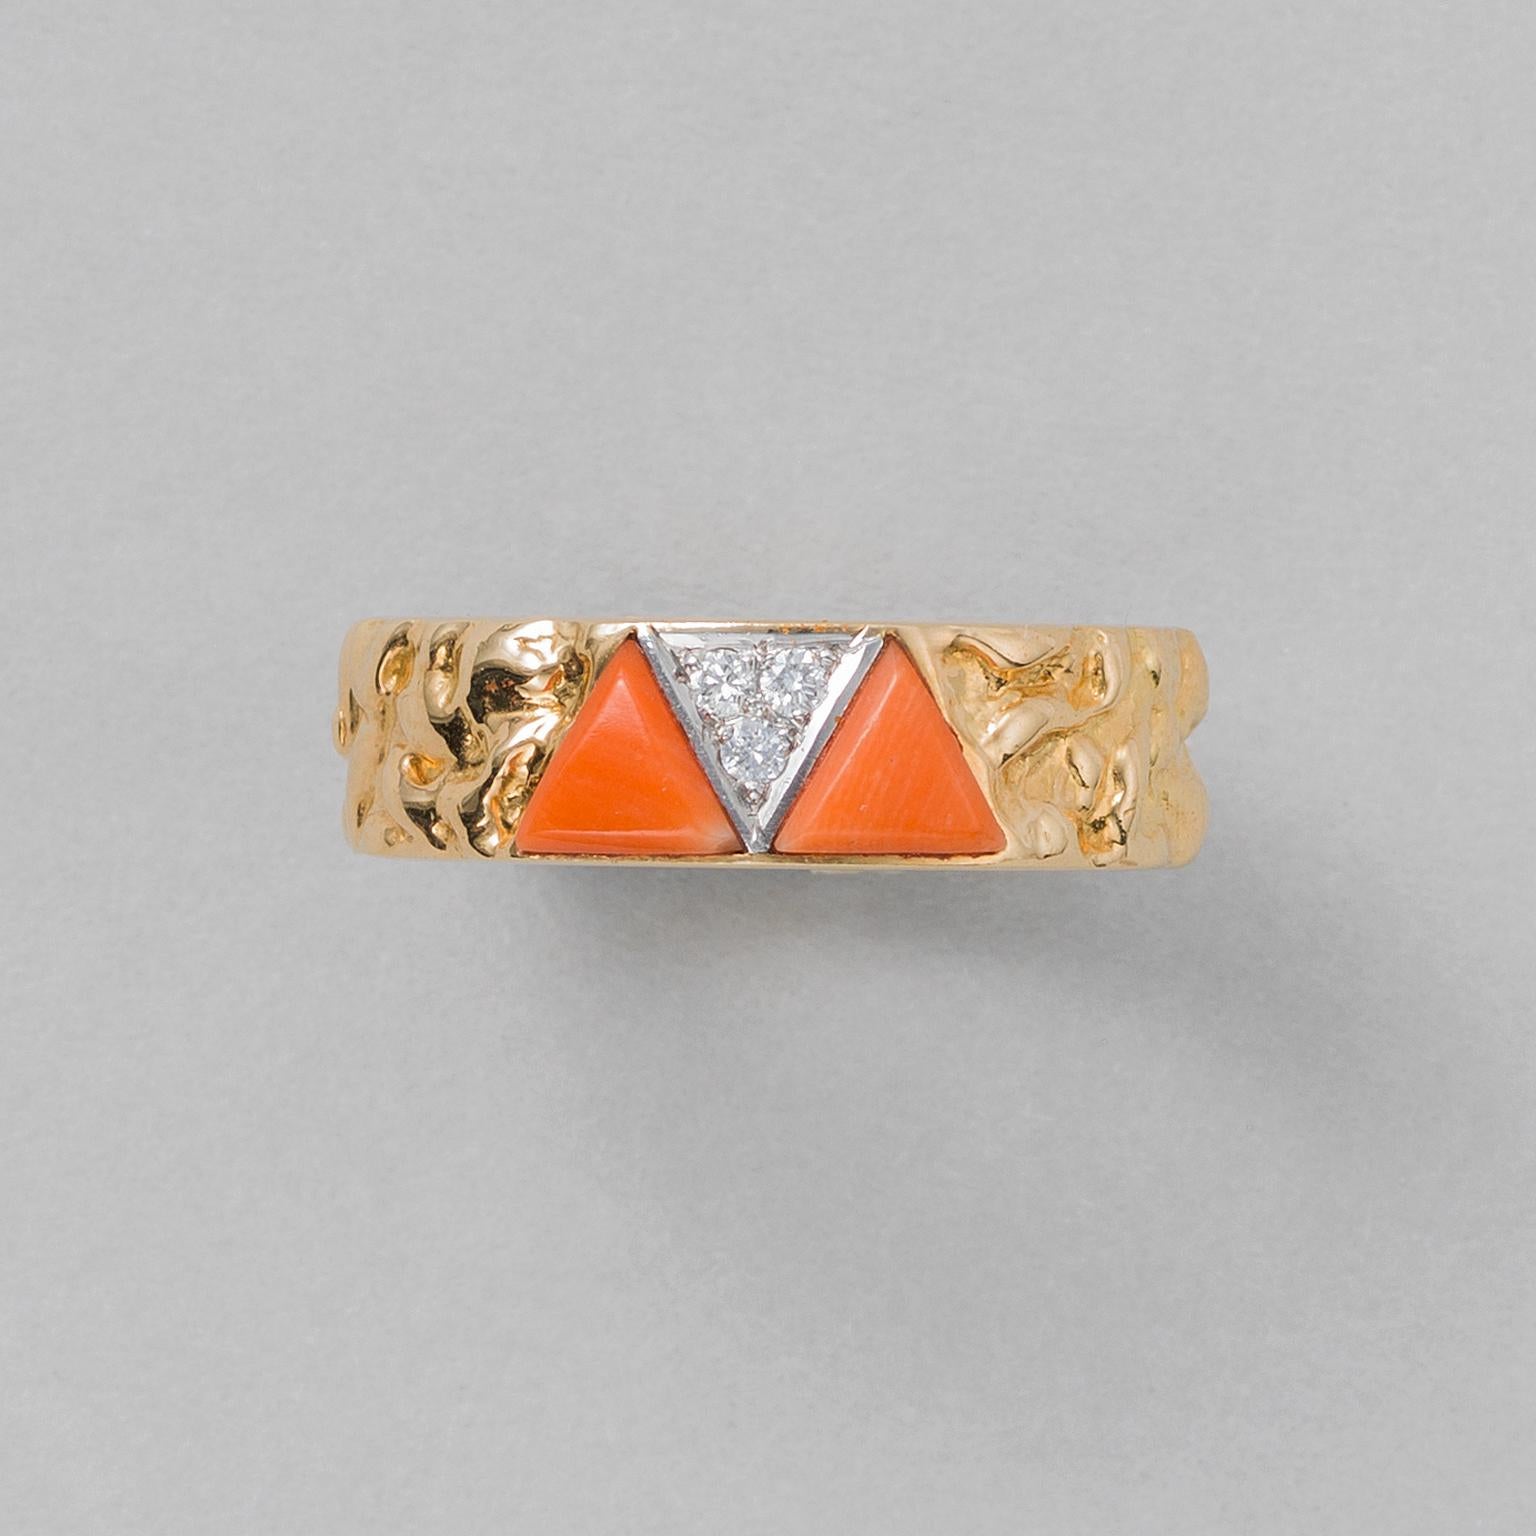 An 18 carat gold band ring with irregular texture set with two triangular pieces of coral with in between a juxta posed platinum triangle set with three brilliant cut diamonds, signed and numbered: VCA NEW YORK, 862 1, Made in France for Van Cleef &